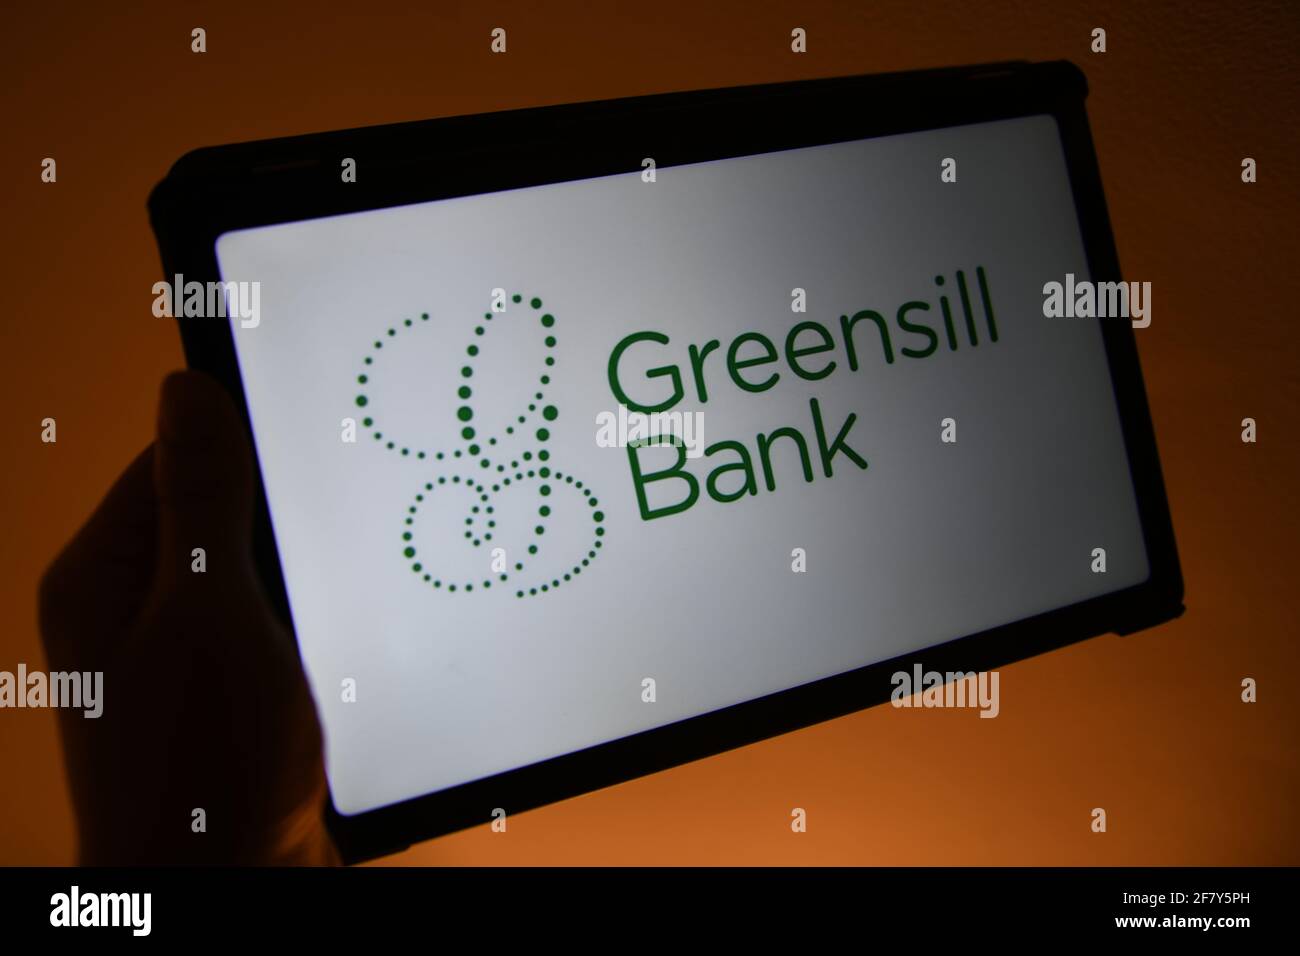 Greensill Bank logo seen on a Samsung tablet Stock Photo